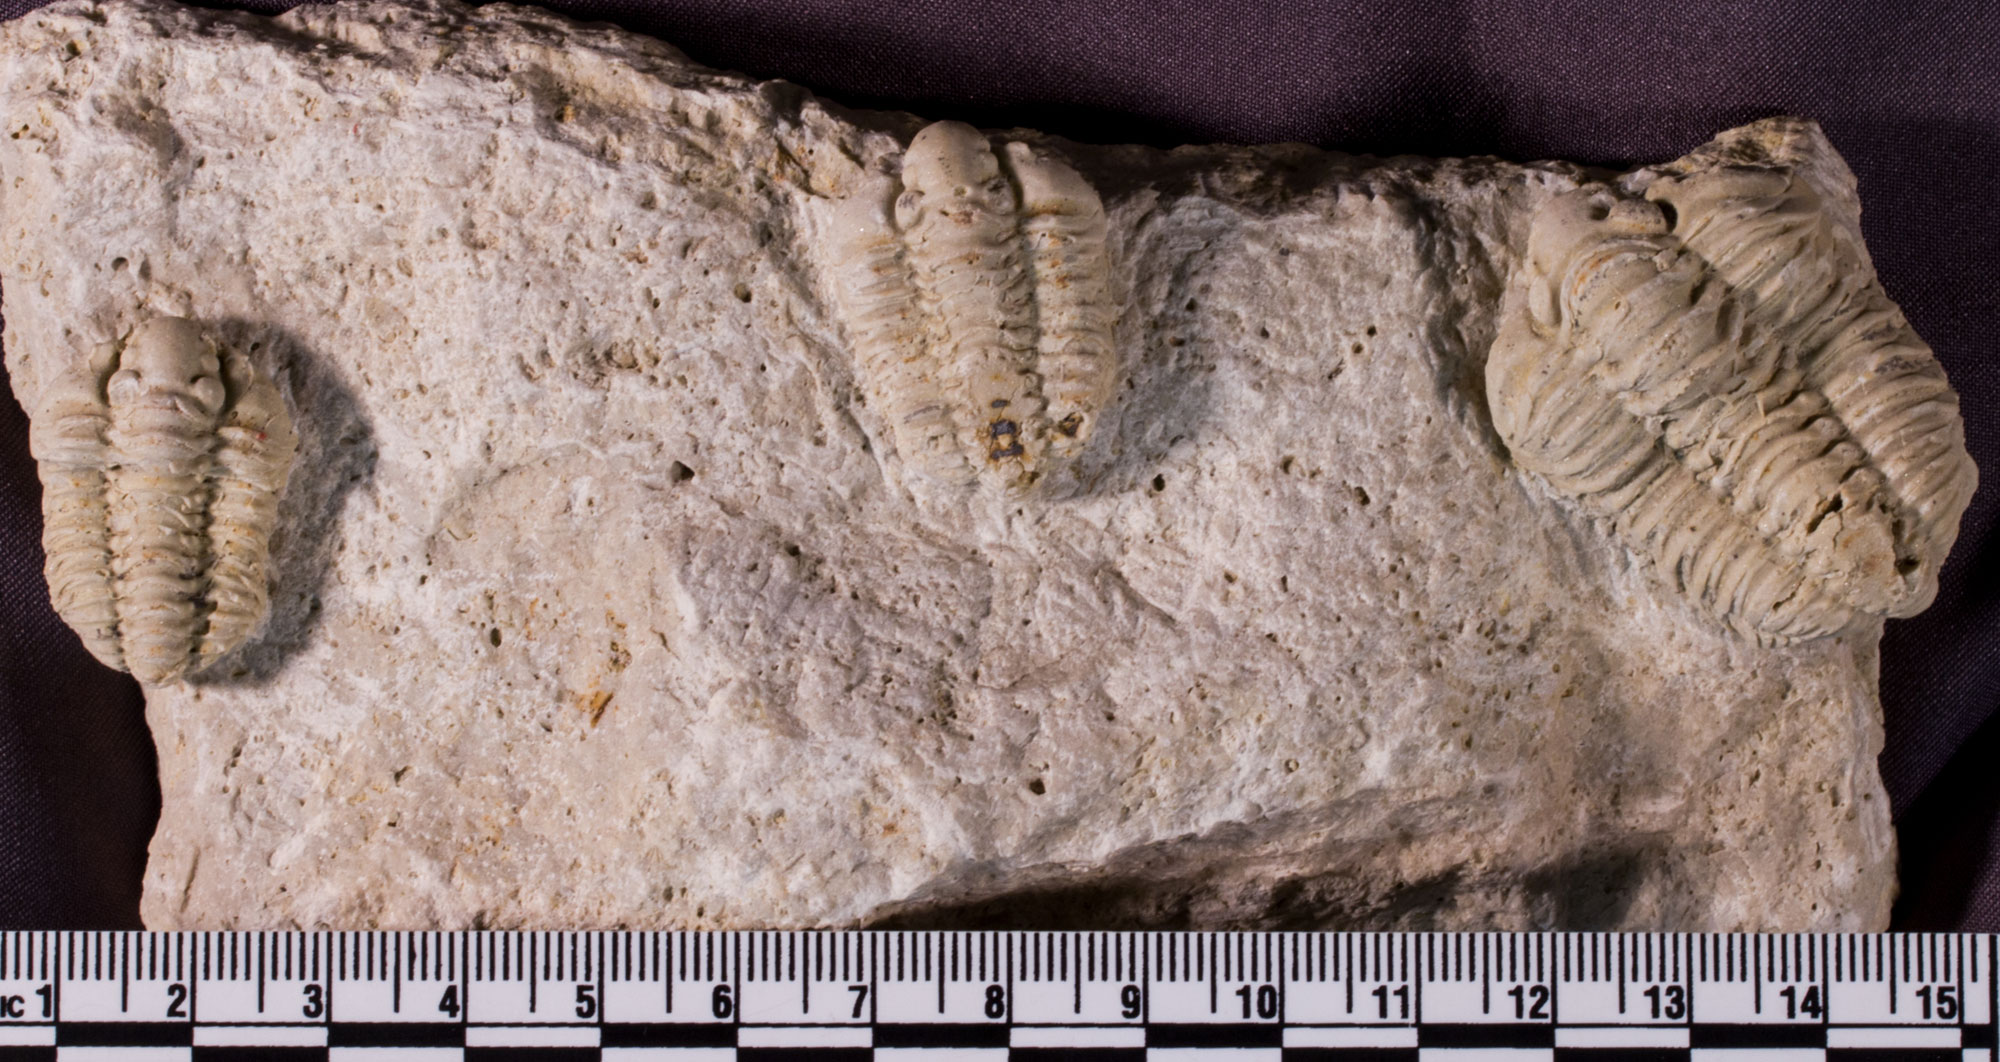 Photograph of a rock with three trilobites on its surface from the Silurian of Illinois. The photo shows an off-white rock with three relatively complete trilobites on top, each trilobite with its head pointed toward the top of the image. The trilobites do not have spines or other ornamentation.